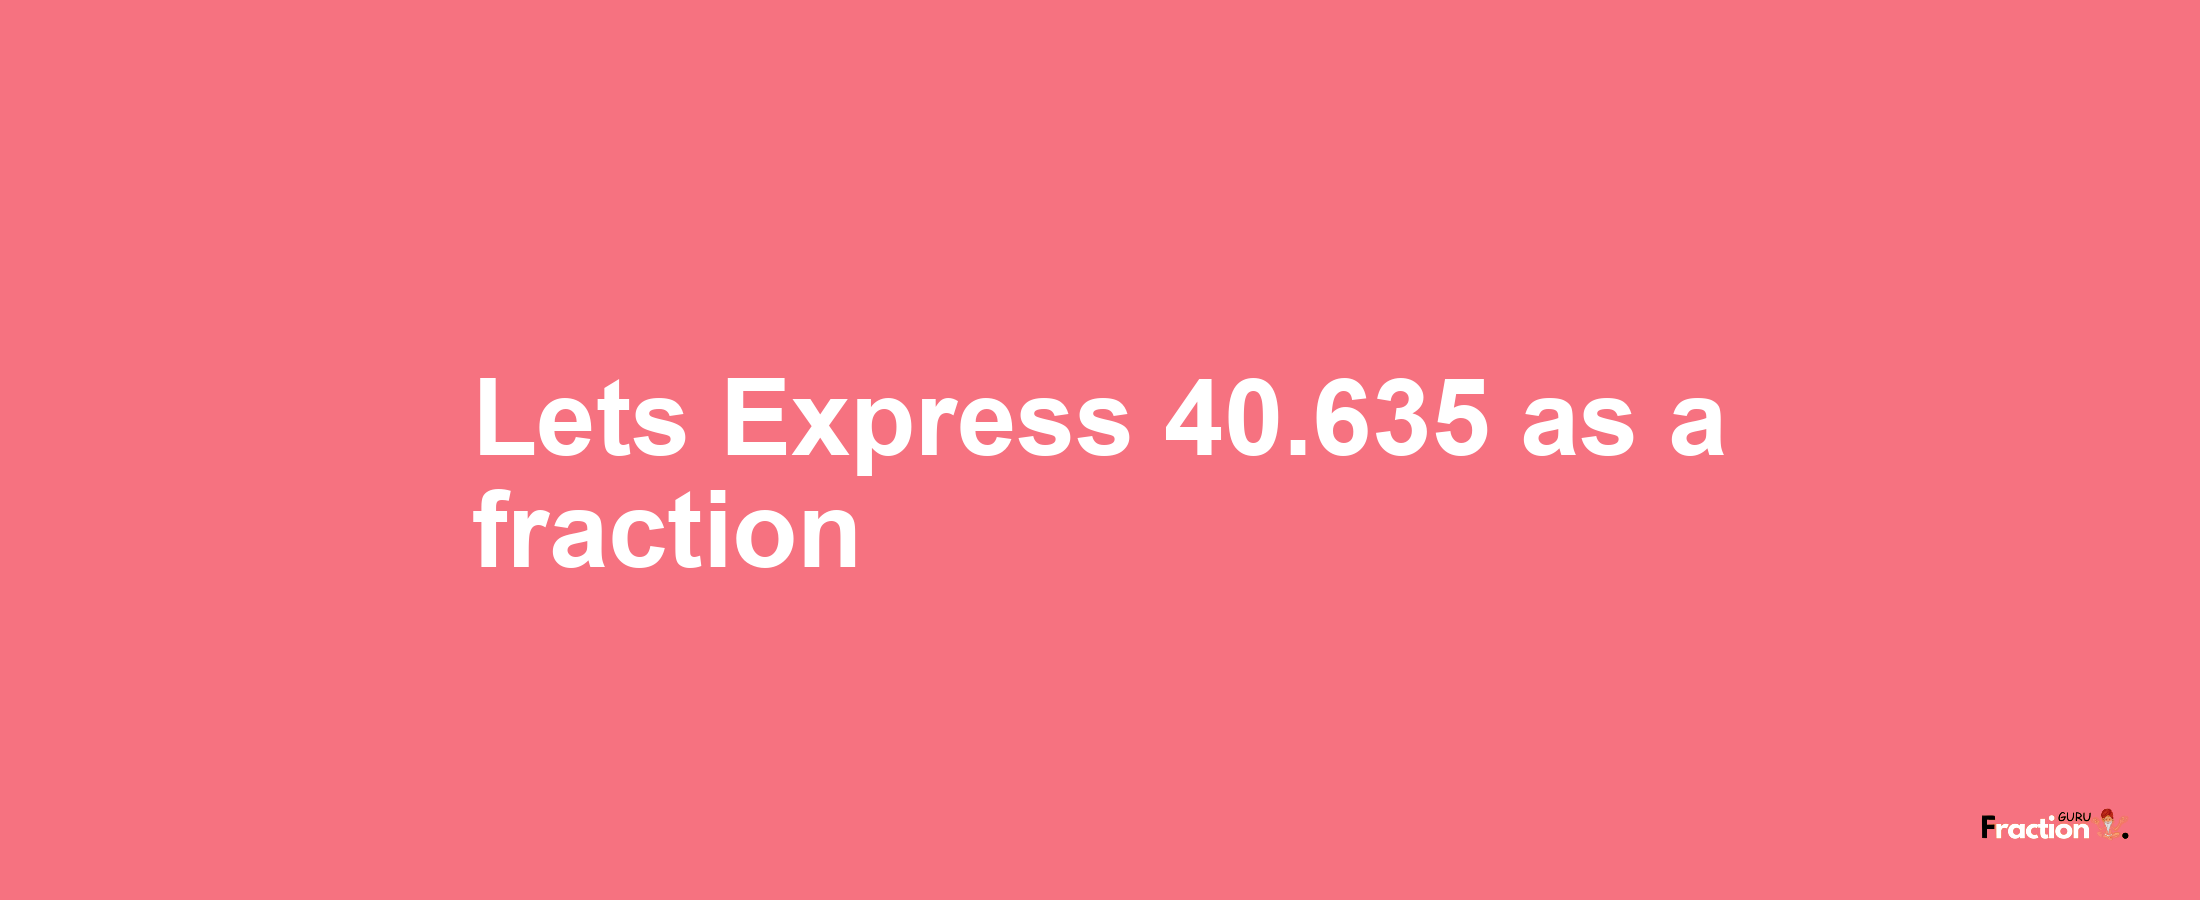 Lets Express 40.635 as afraction